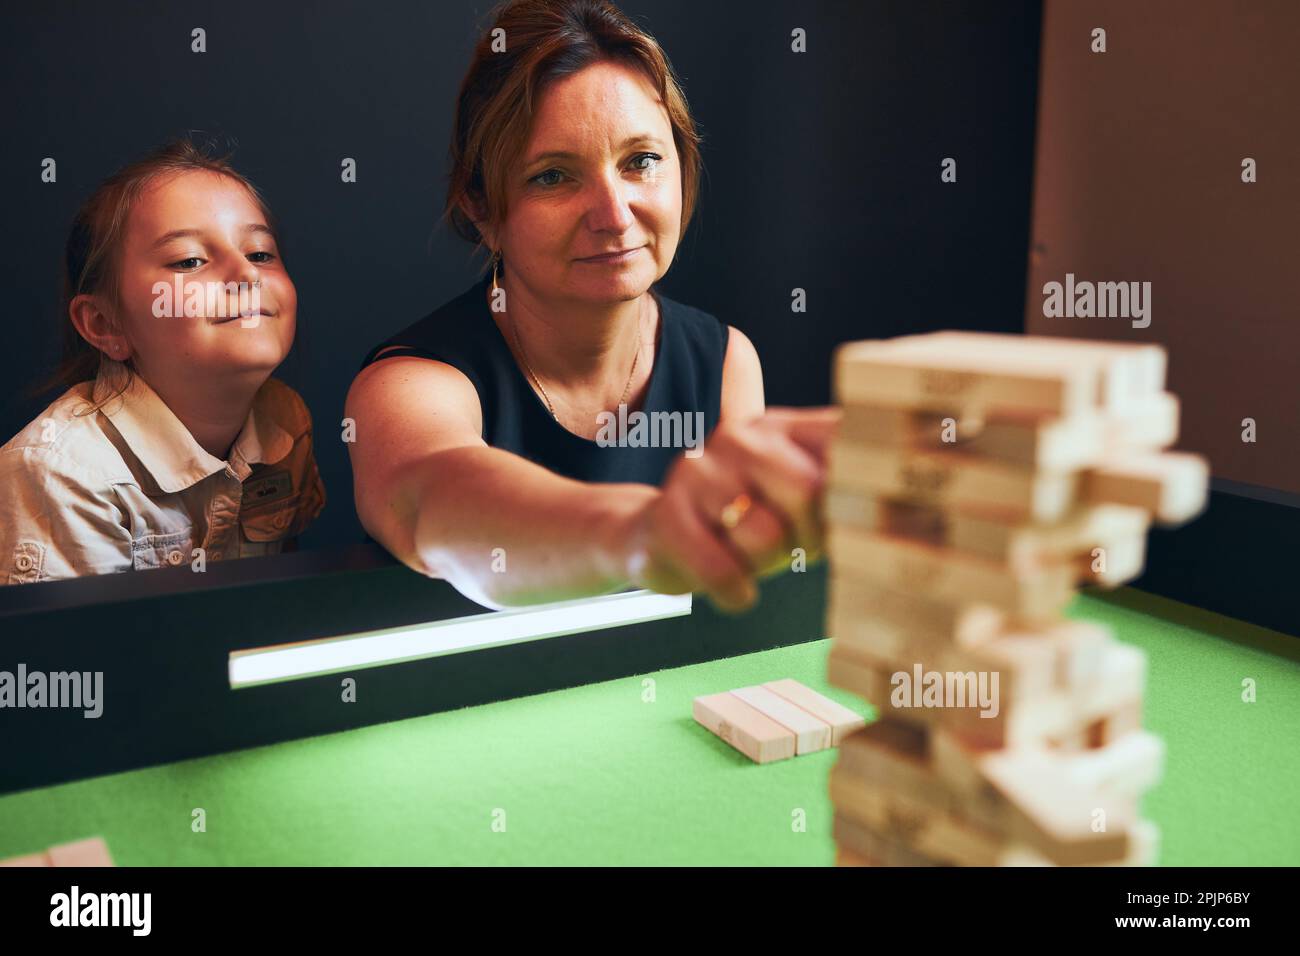 Mother playing jenga game with her daughter in play room. Woman removing block from stack. Unstable tower of wooden blocks. Game of skill and fun. Fam Stock Photo